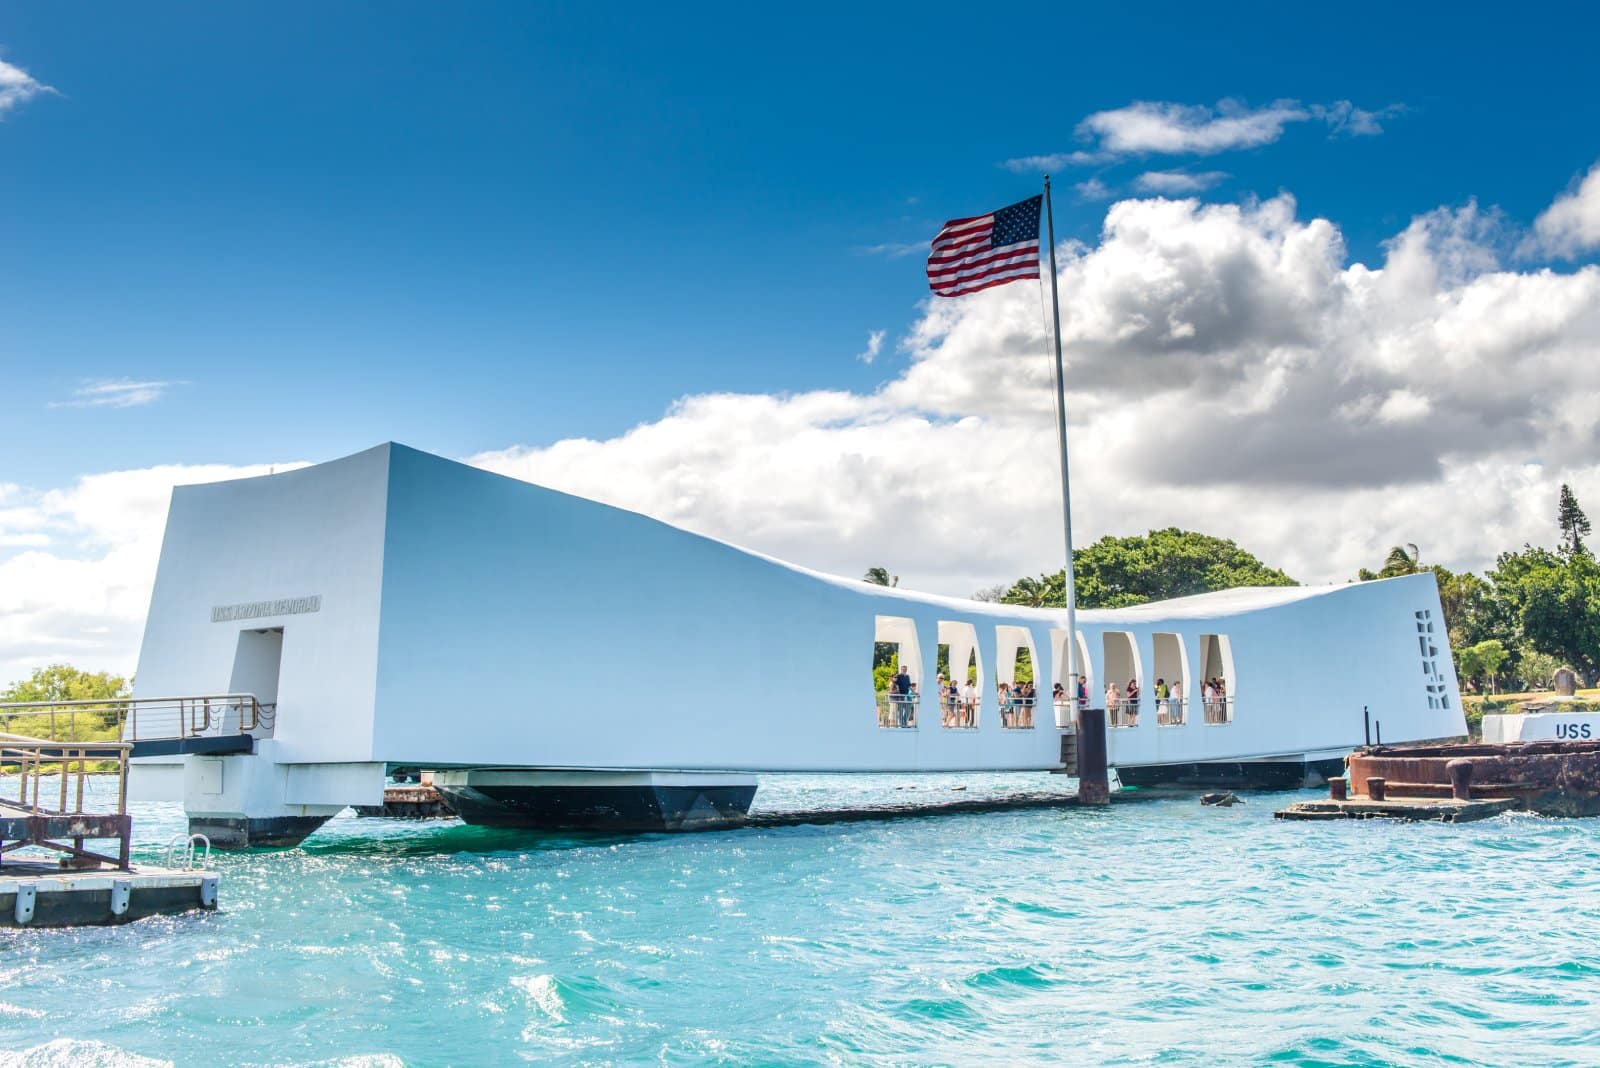 Image Credit: Shutterstock / Pung <p>Floating above the sunken battleship, the USS Arizona Memorial allows visitors to observe the wreckage below, a direct connection to the lives lost during the attack on Pearl Harbor. This experience helps visitors understand the sudden and profound impact of the event on American history, fostering a deeper appreciation for peace and preparedness.</p>